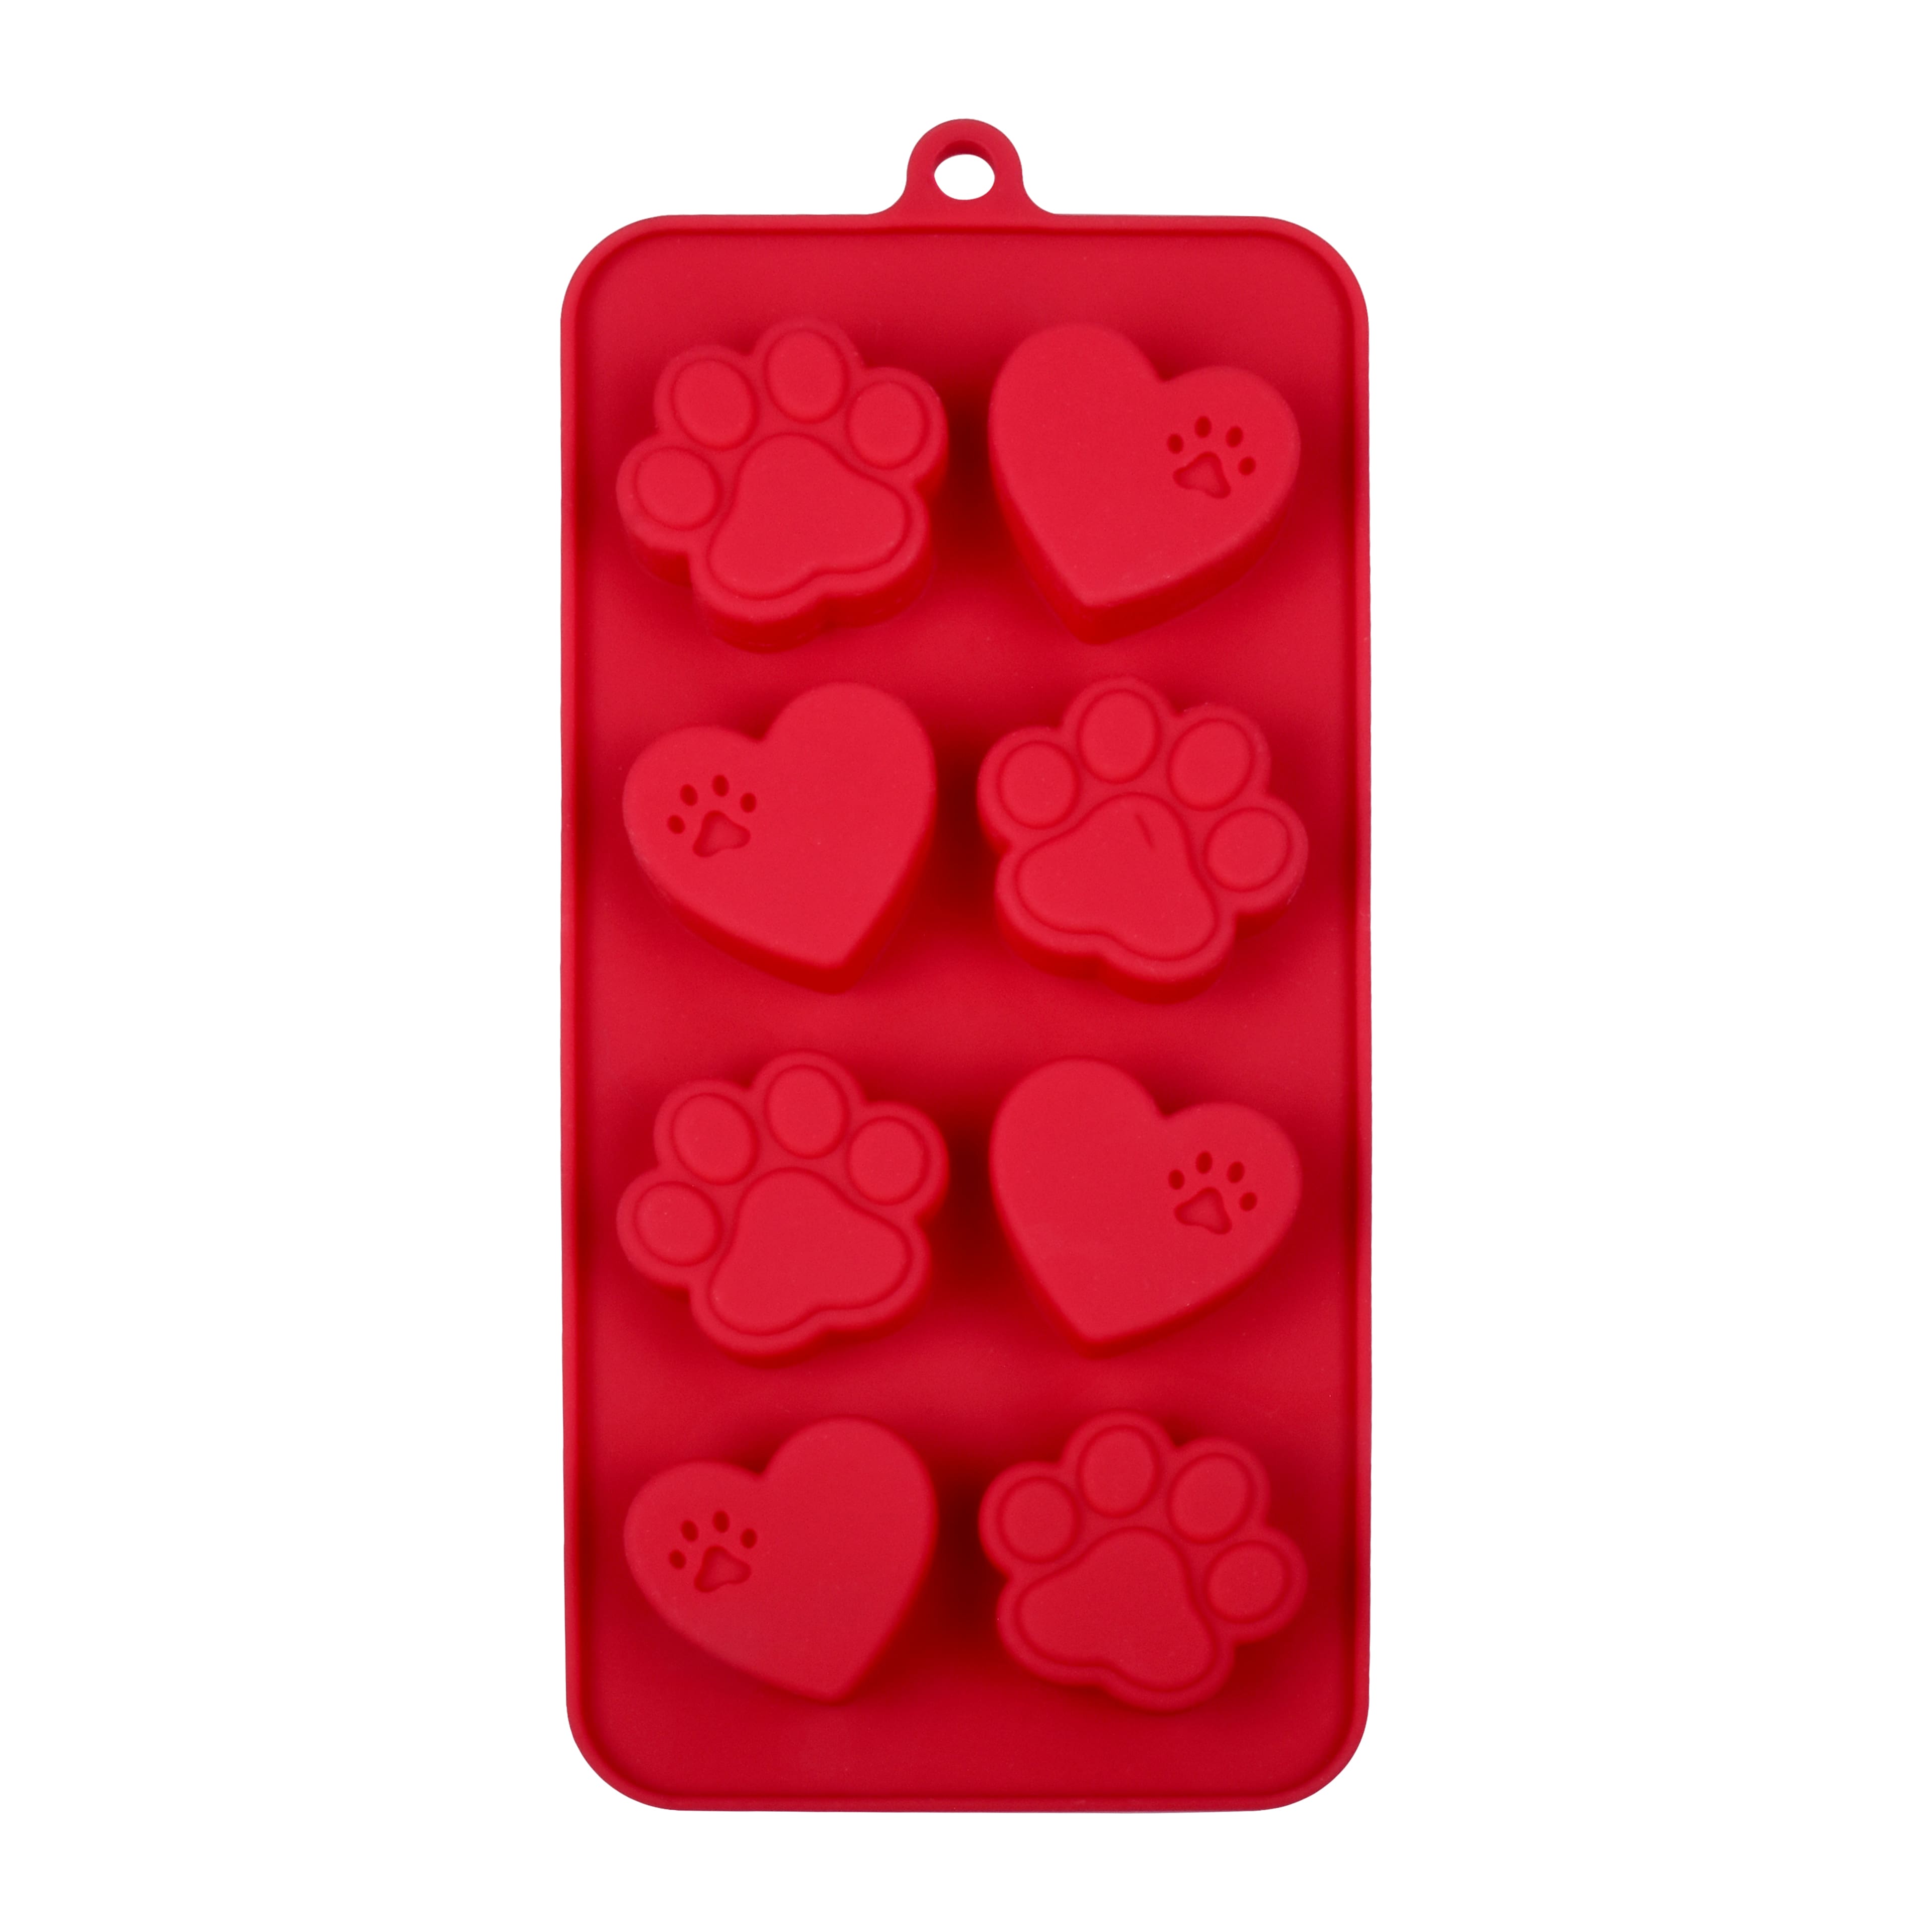 Celebrate It Silicone LOVE Candy Mold and Heart 3 Part Candy Mold  Valentines Day